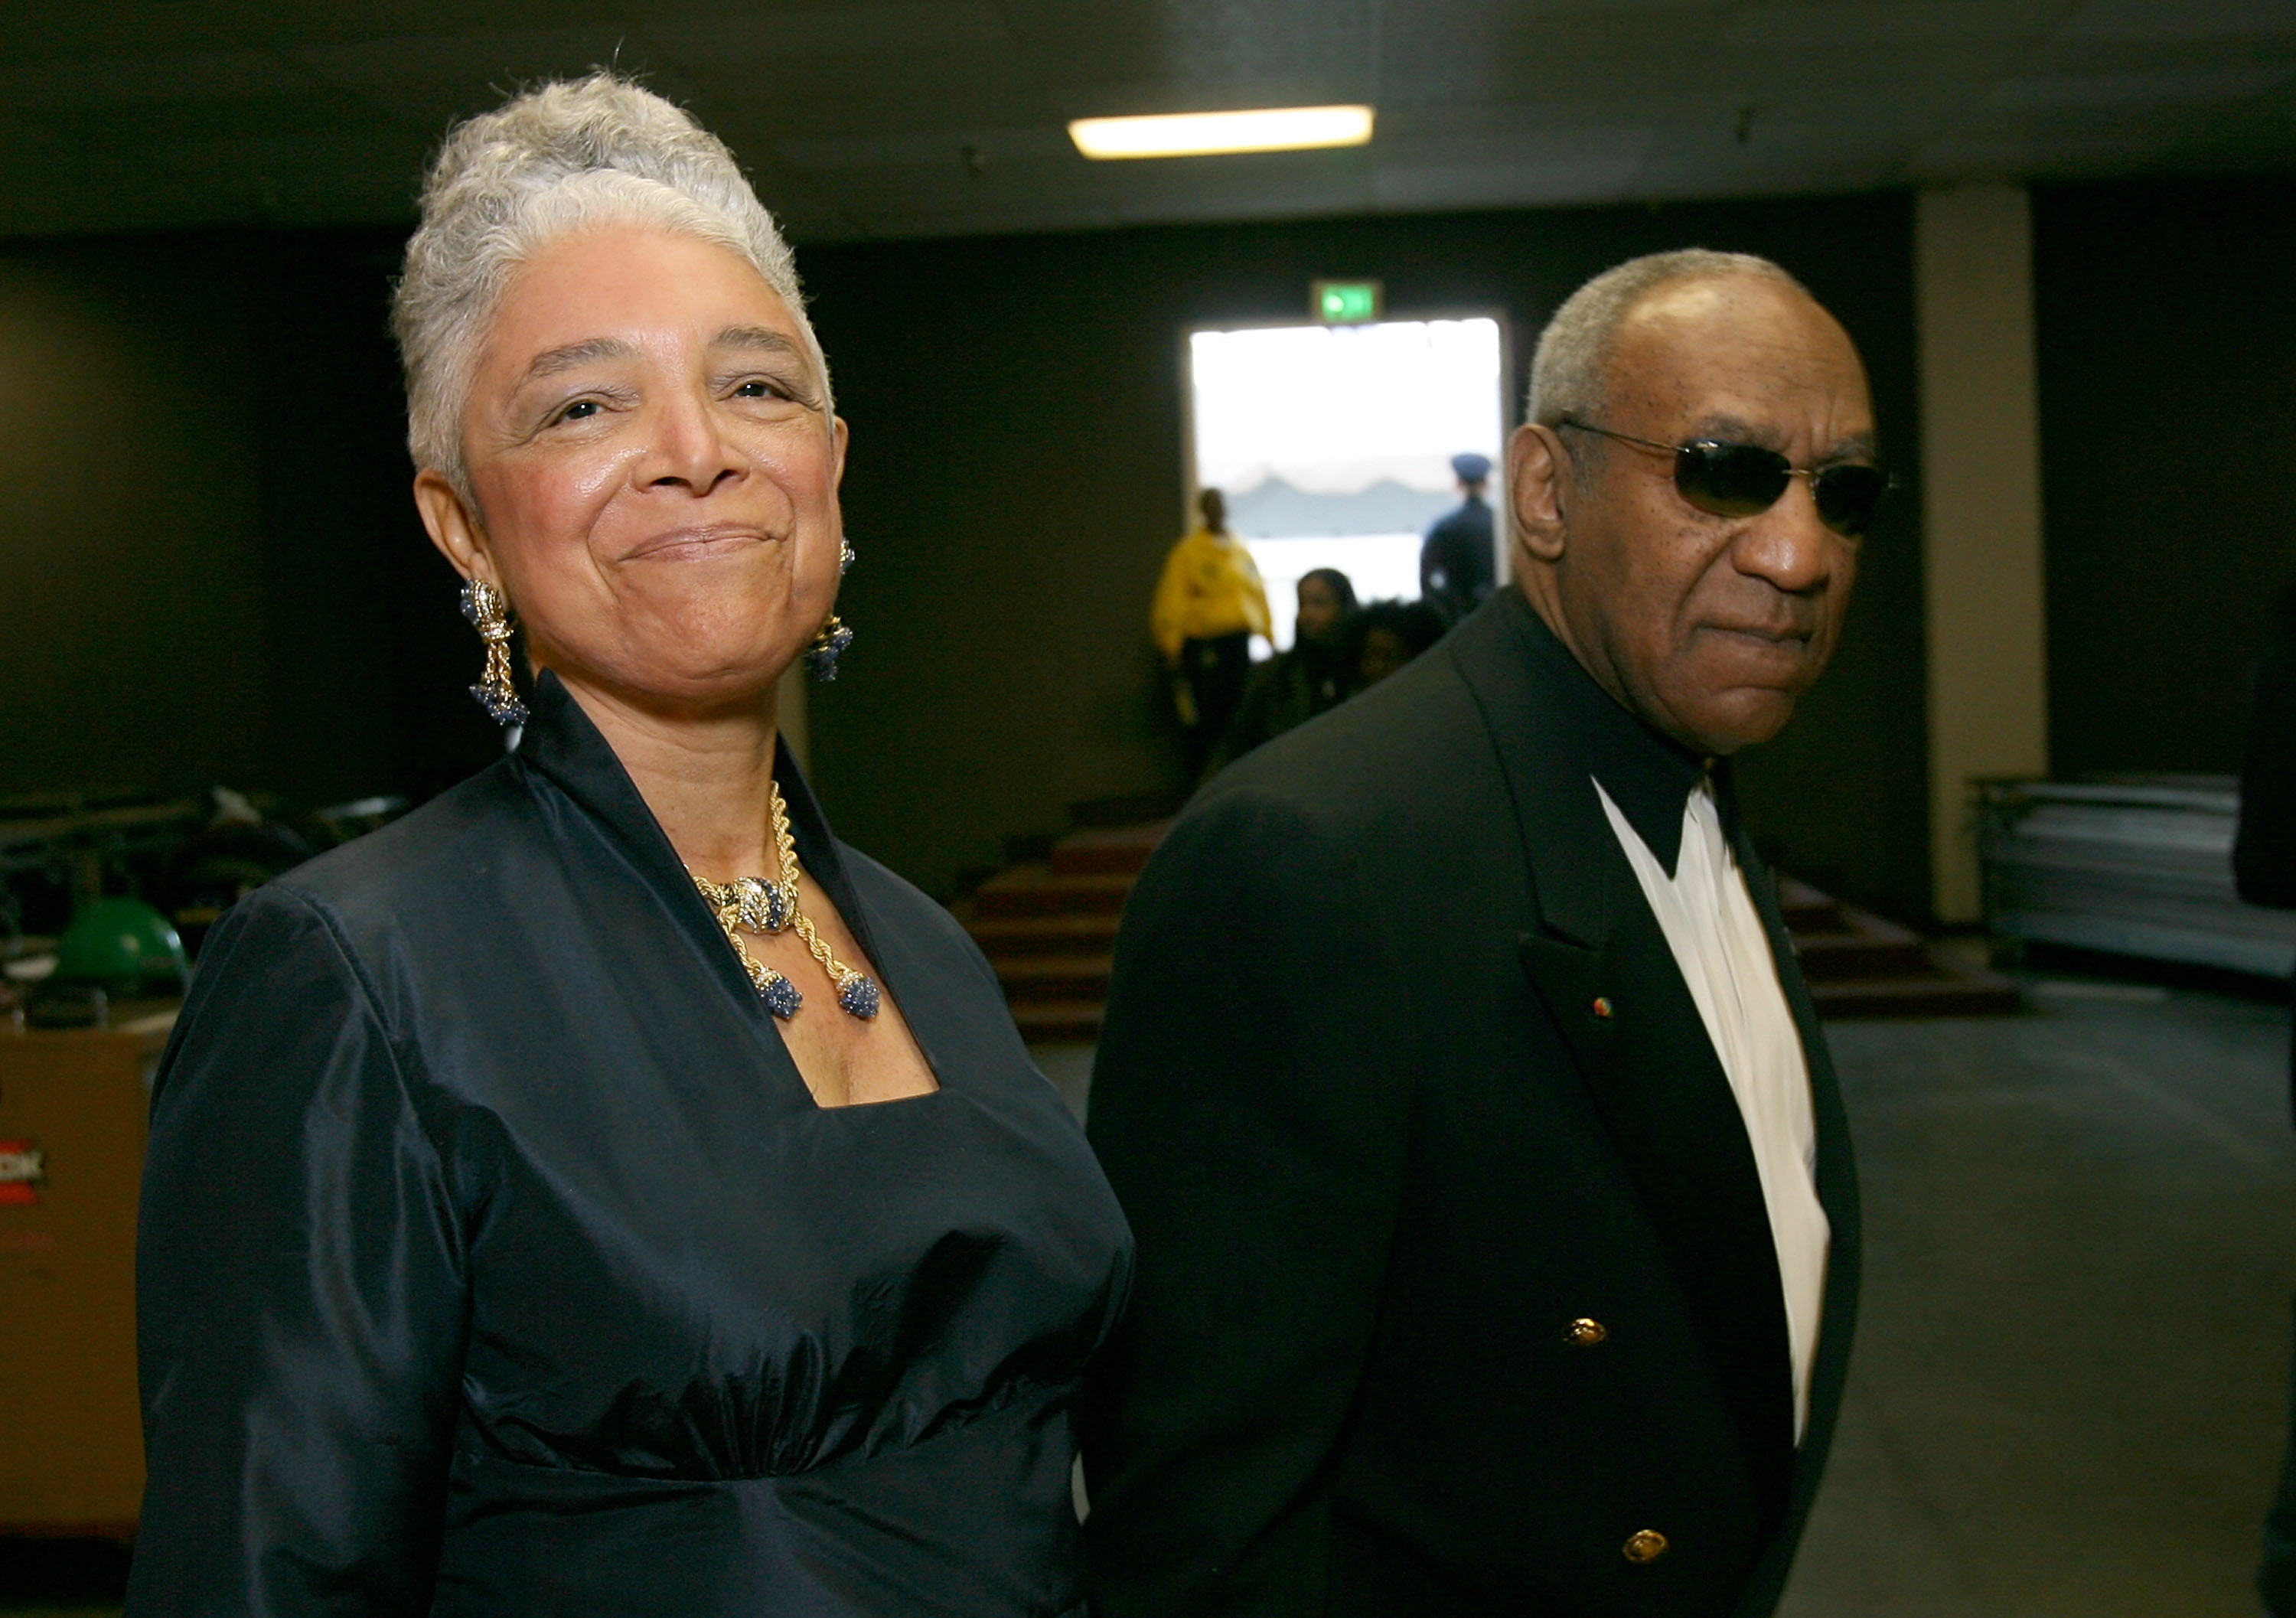 Camille cosby, wife of bill cosby, has suggested that the #metoo movement i...